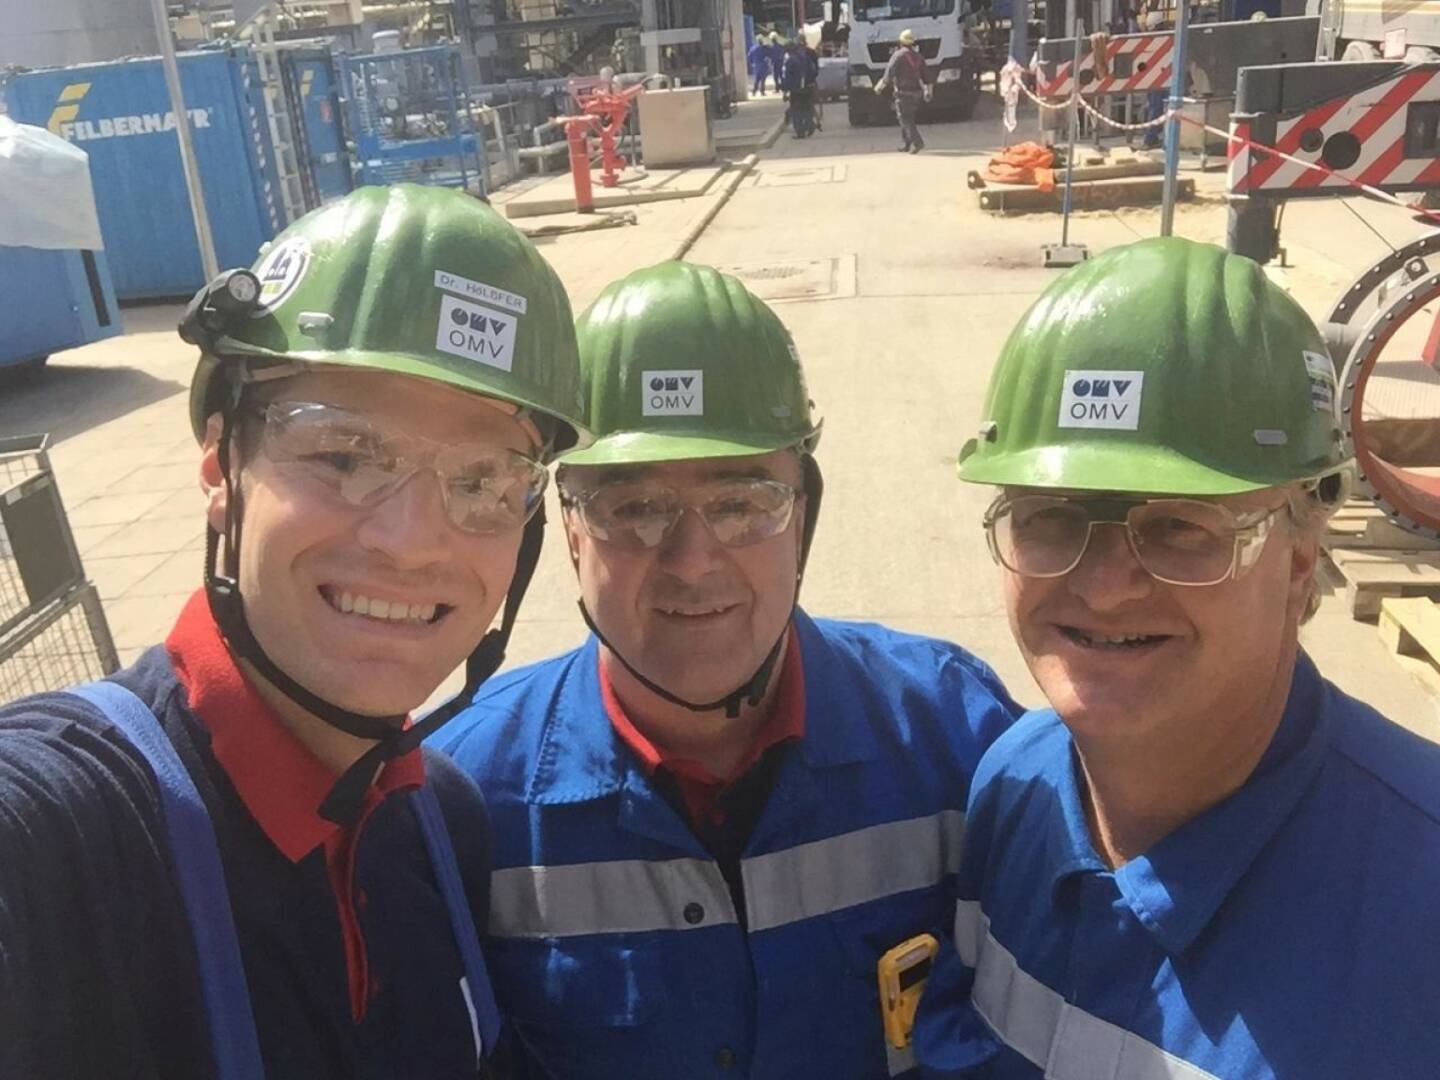 OMV - Our Board member Manfred Leitner visited the Schwechat refinery last week, where a so-called 'Turnaround' is currently underway. He met up with the highly motivated team, and even though this major project is keeping everyone very busy, there's always time for a selfie :) Find out more in our video: http://bit.ly/2oslVo0